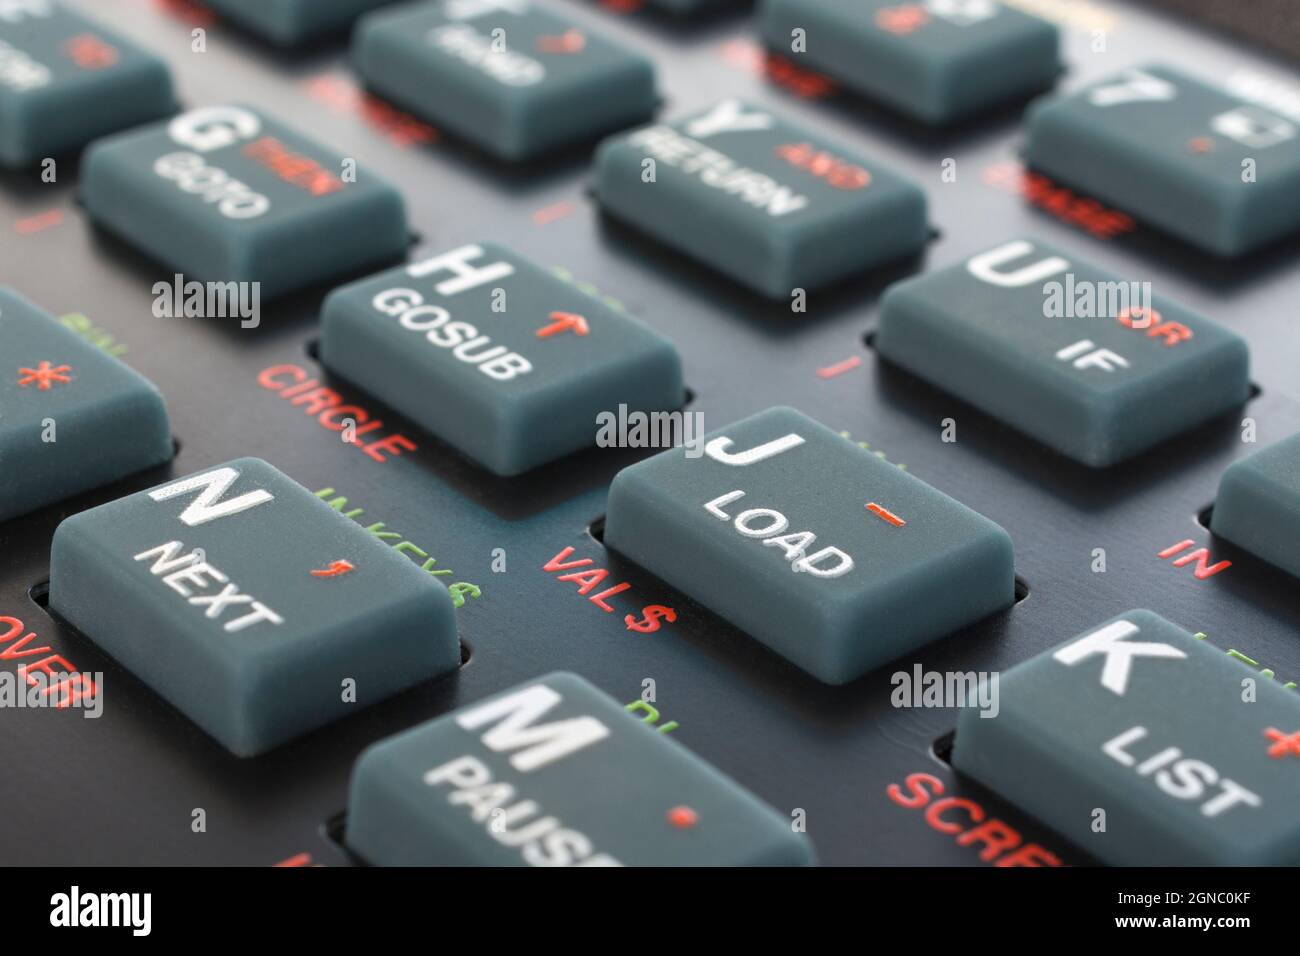 Sinclair ZX Spectrum keyboard close-up. Focus on Basic LOAD command key. Vintage 8-bit home computer from 1980s (see Notes). Stock Photo